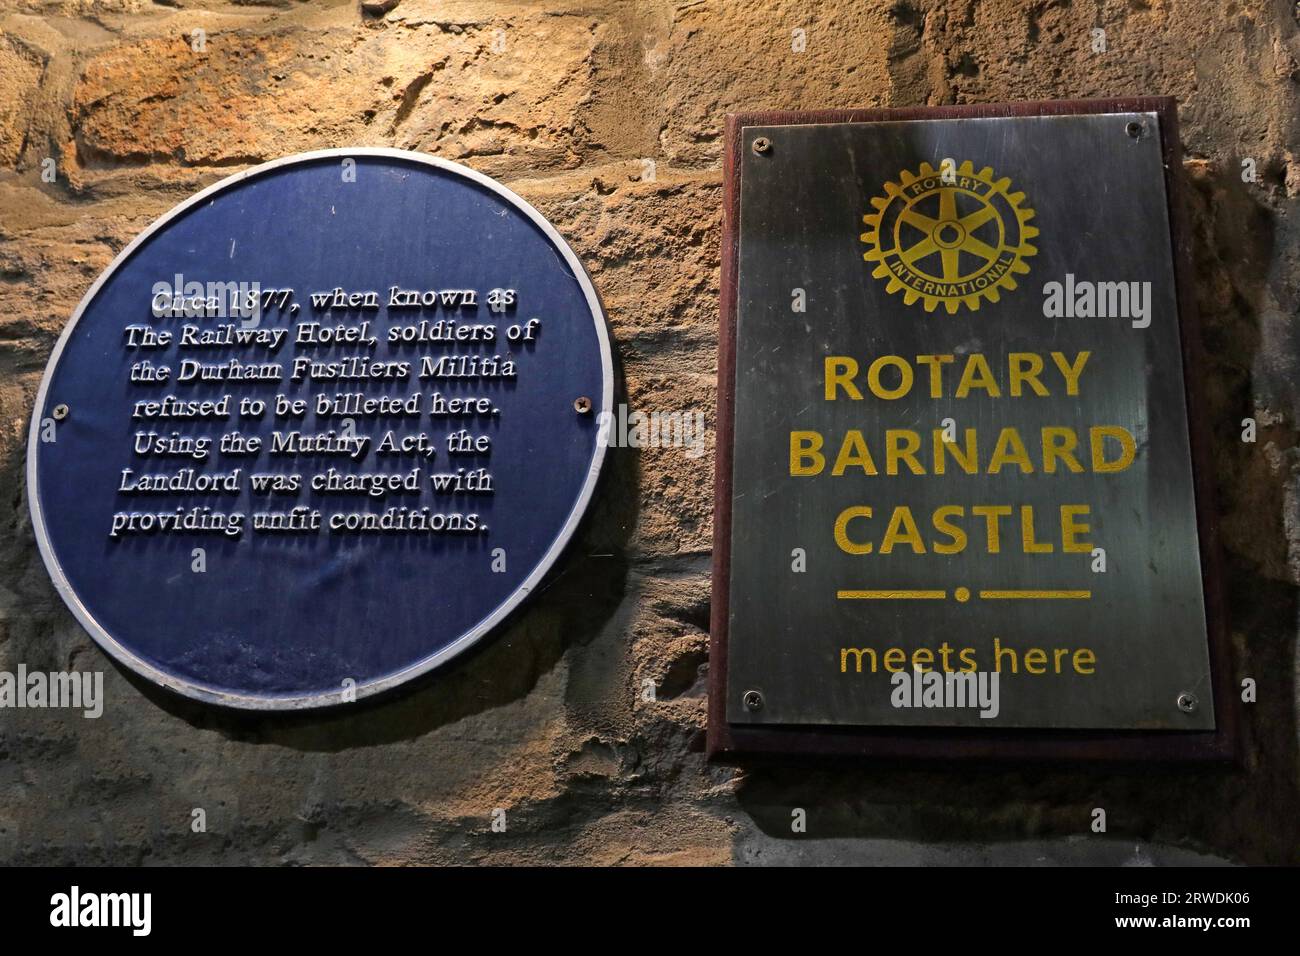 Rotary at the Old Well Inn, 21 The Bank, Barnard Castle, Teesdale, County Durham, ENGLAND, UK, DL12 8PH Stockfoto